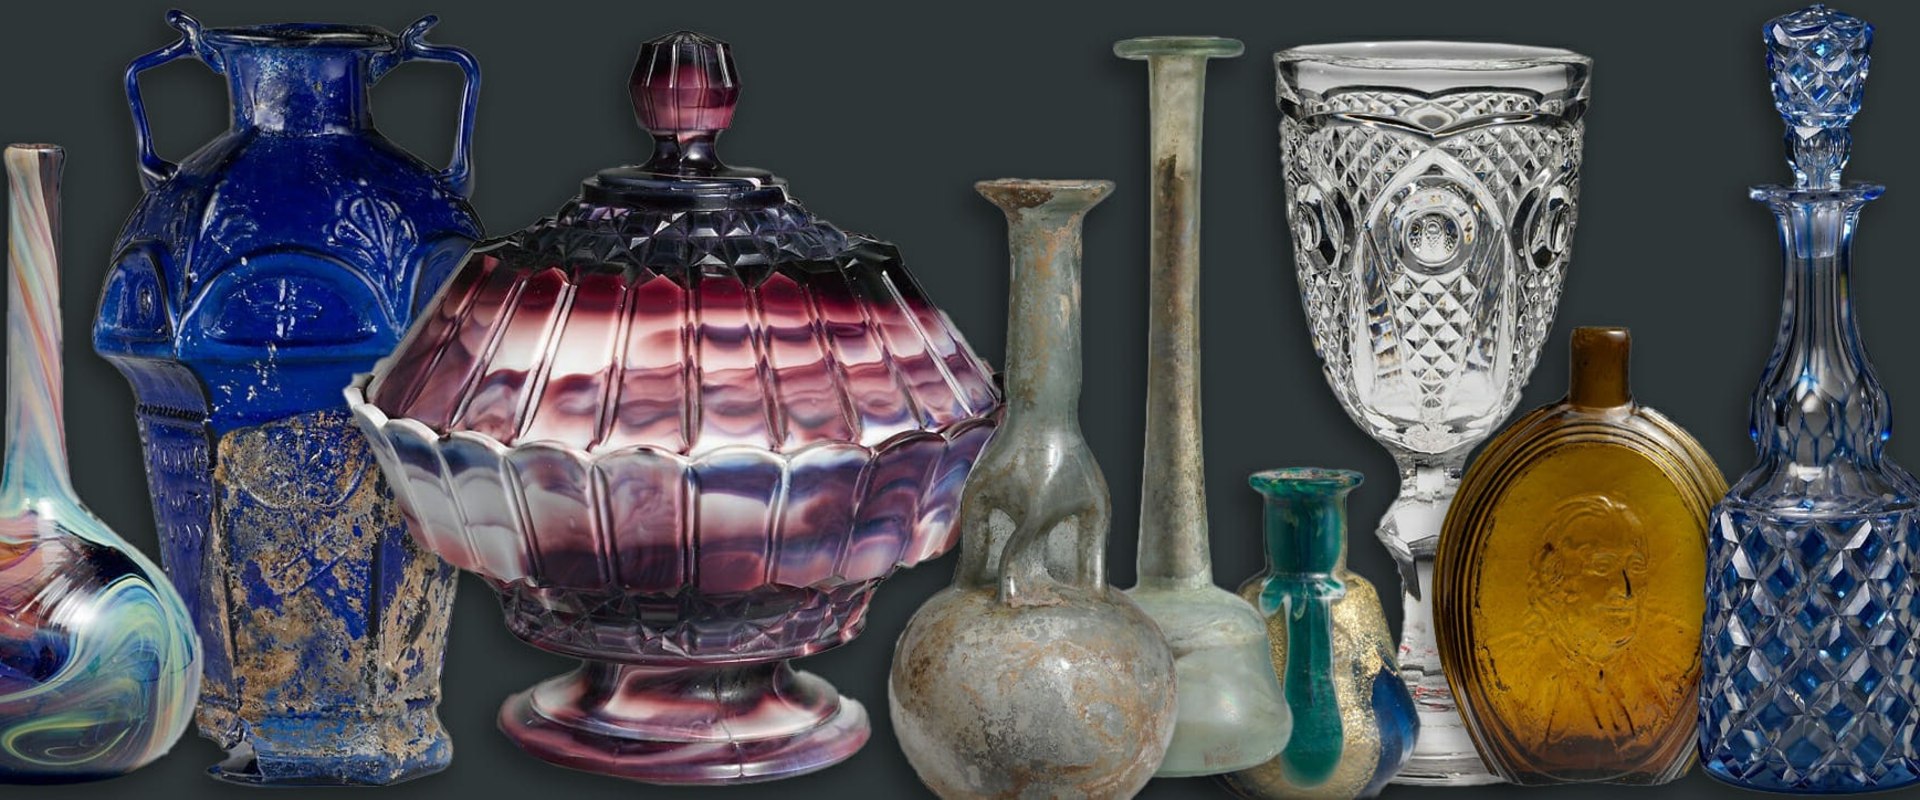 The Factors That Influence the Value of Fine Glassware